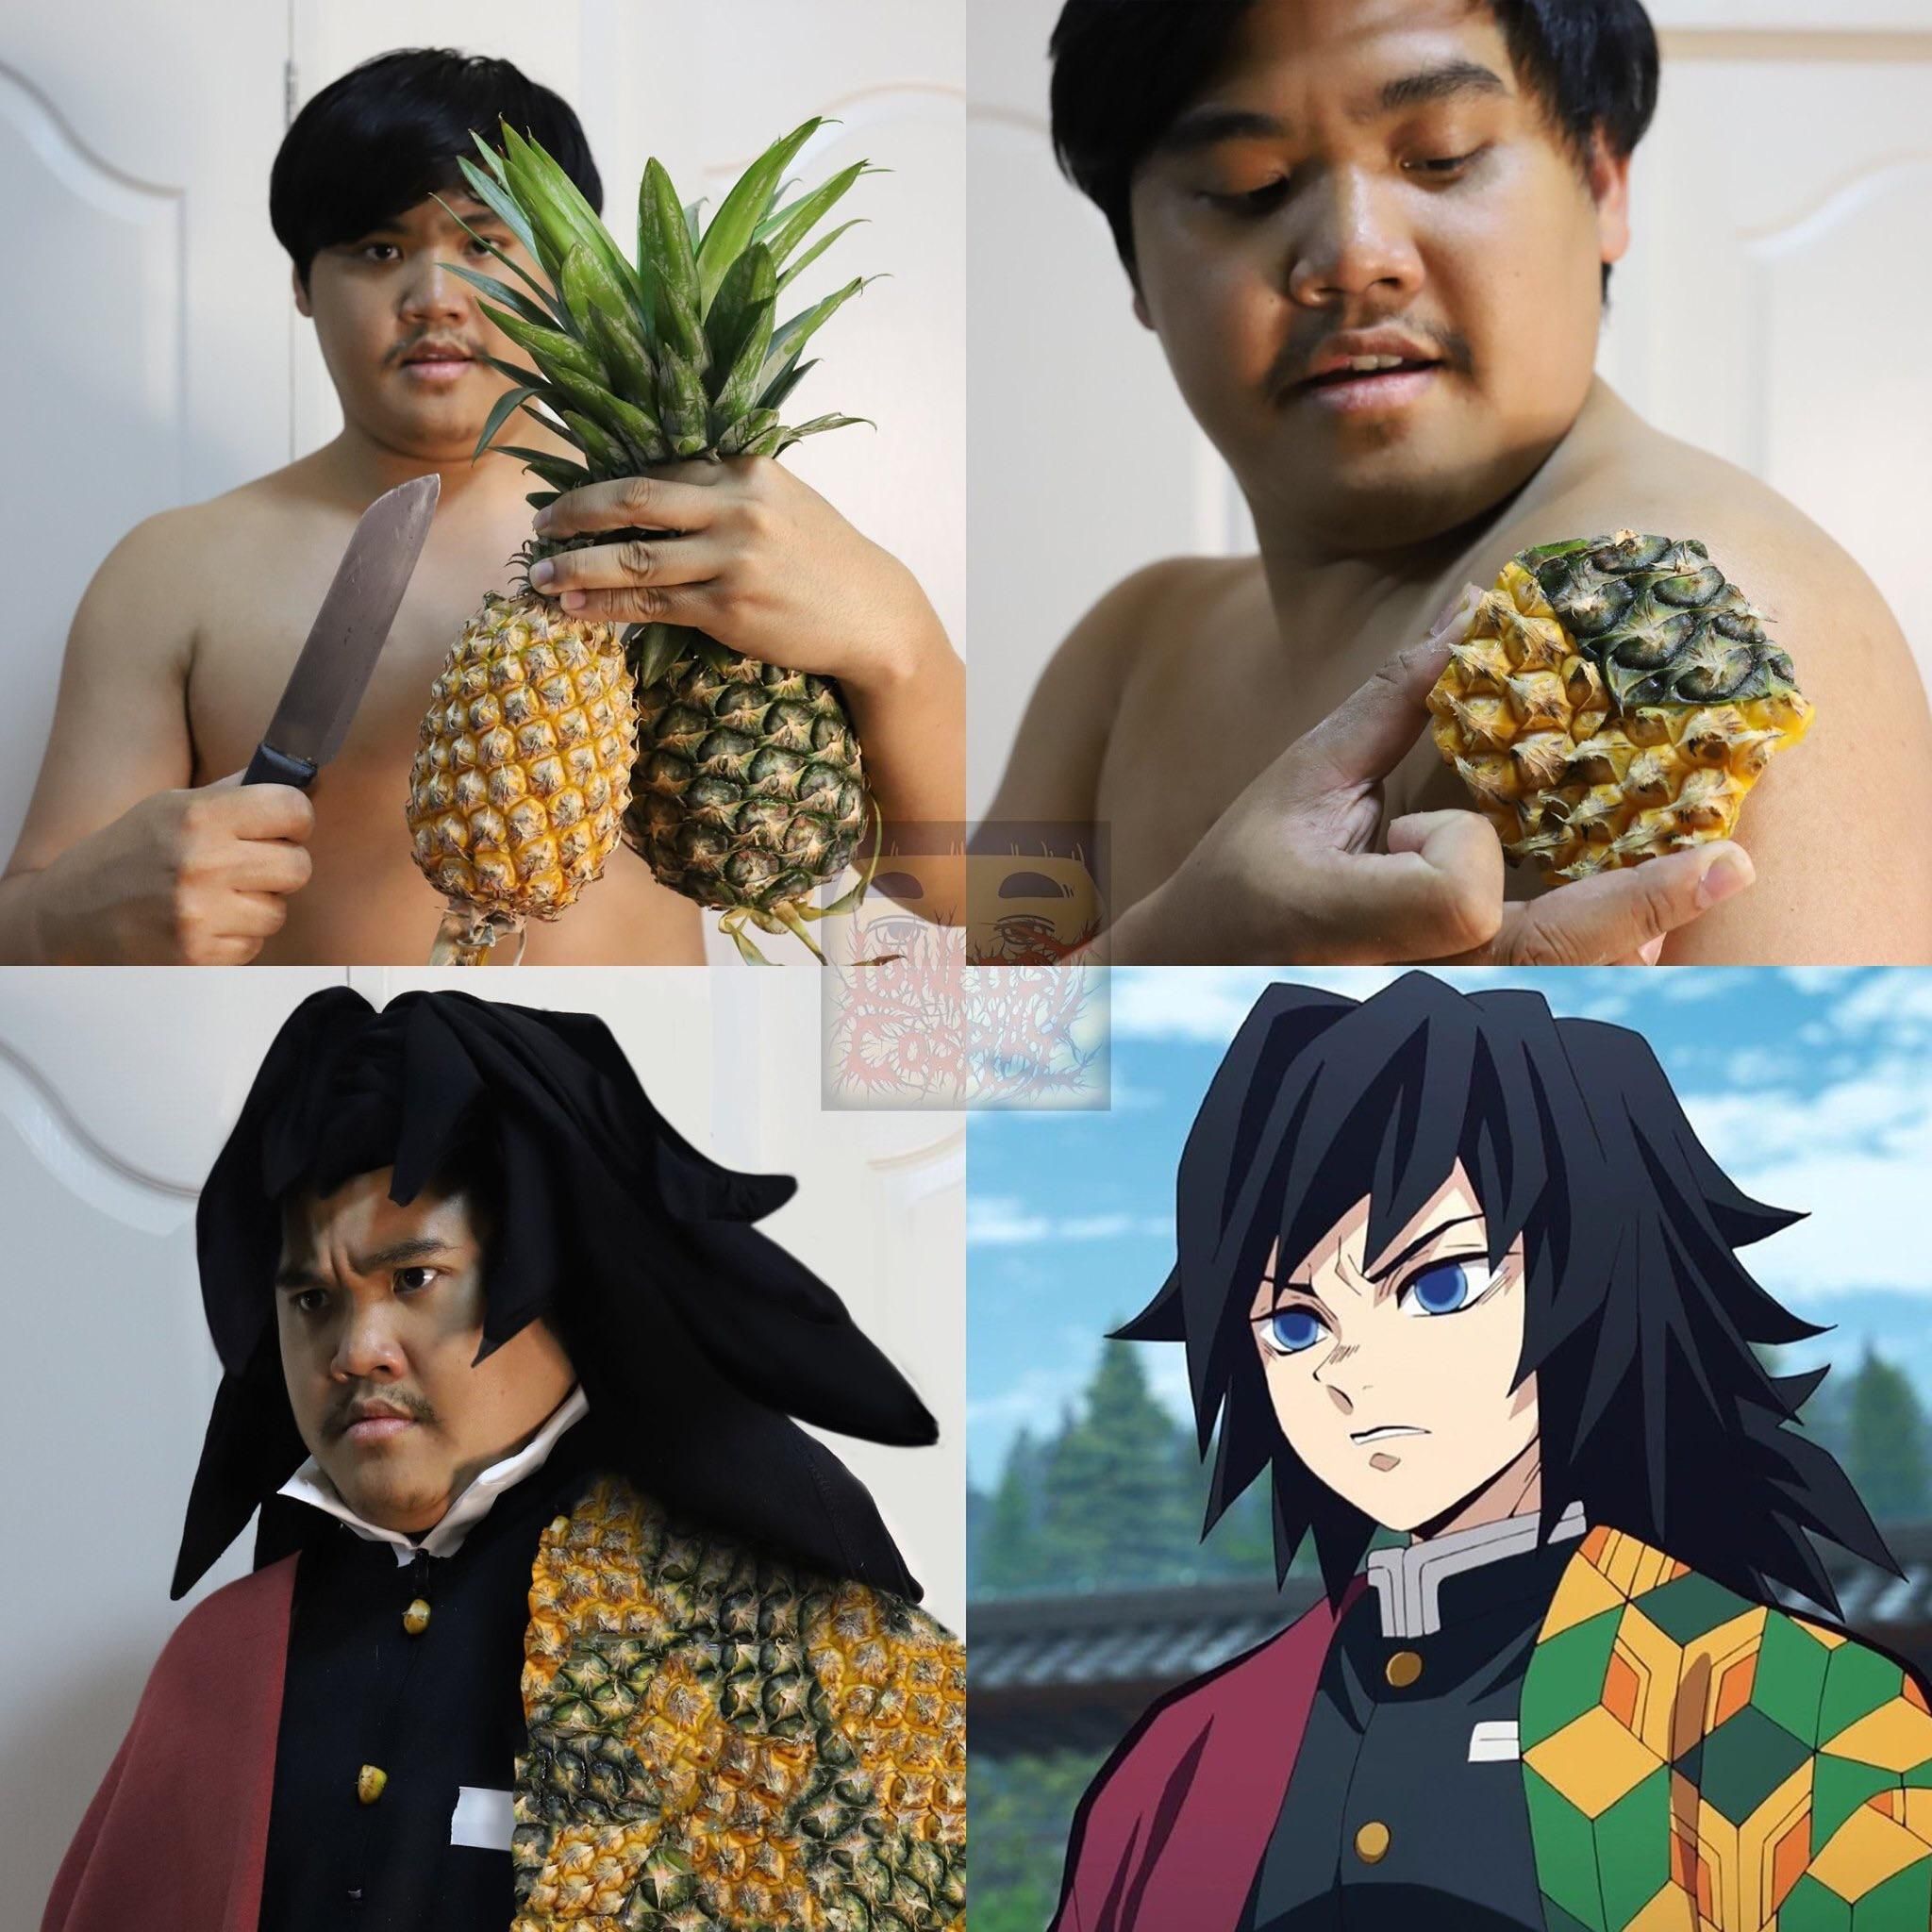 Lonelyman and his pineapple.